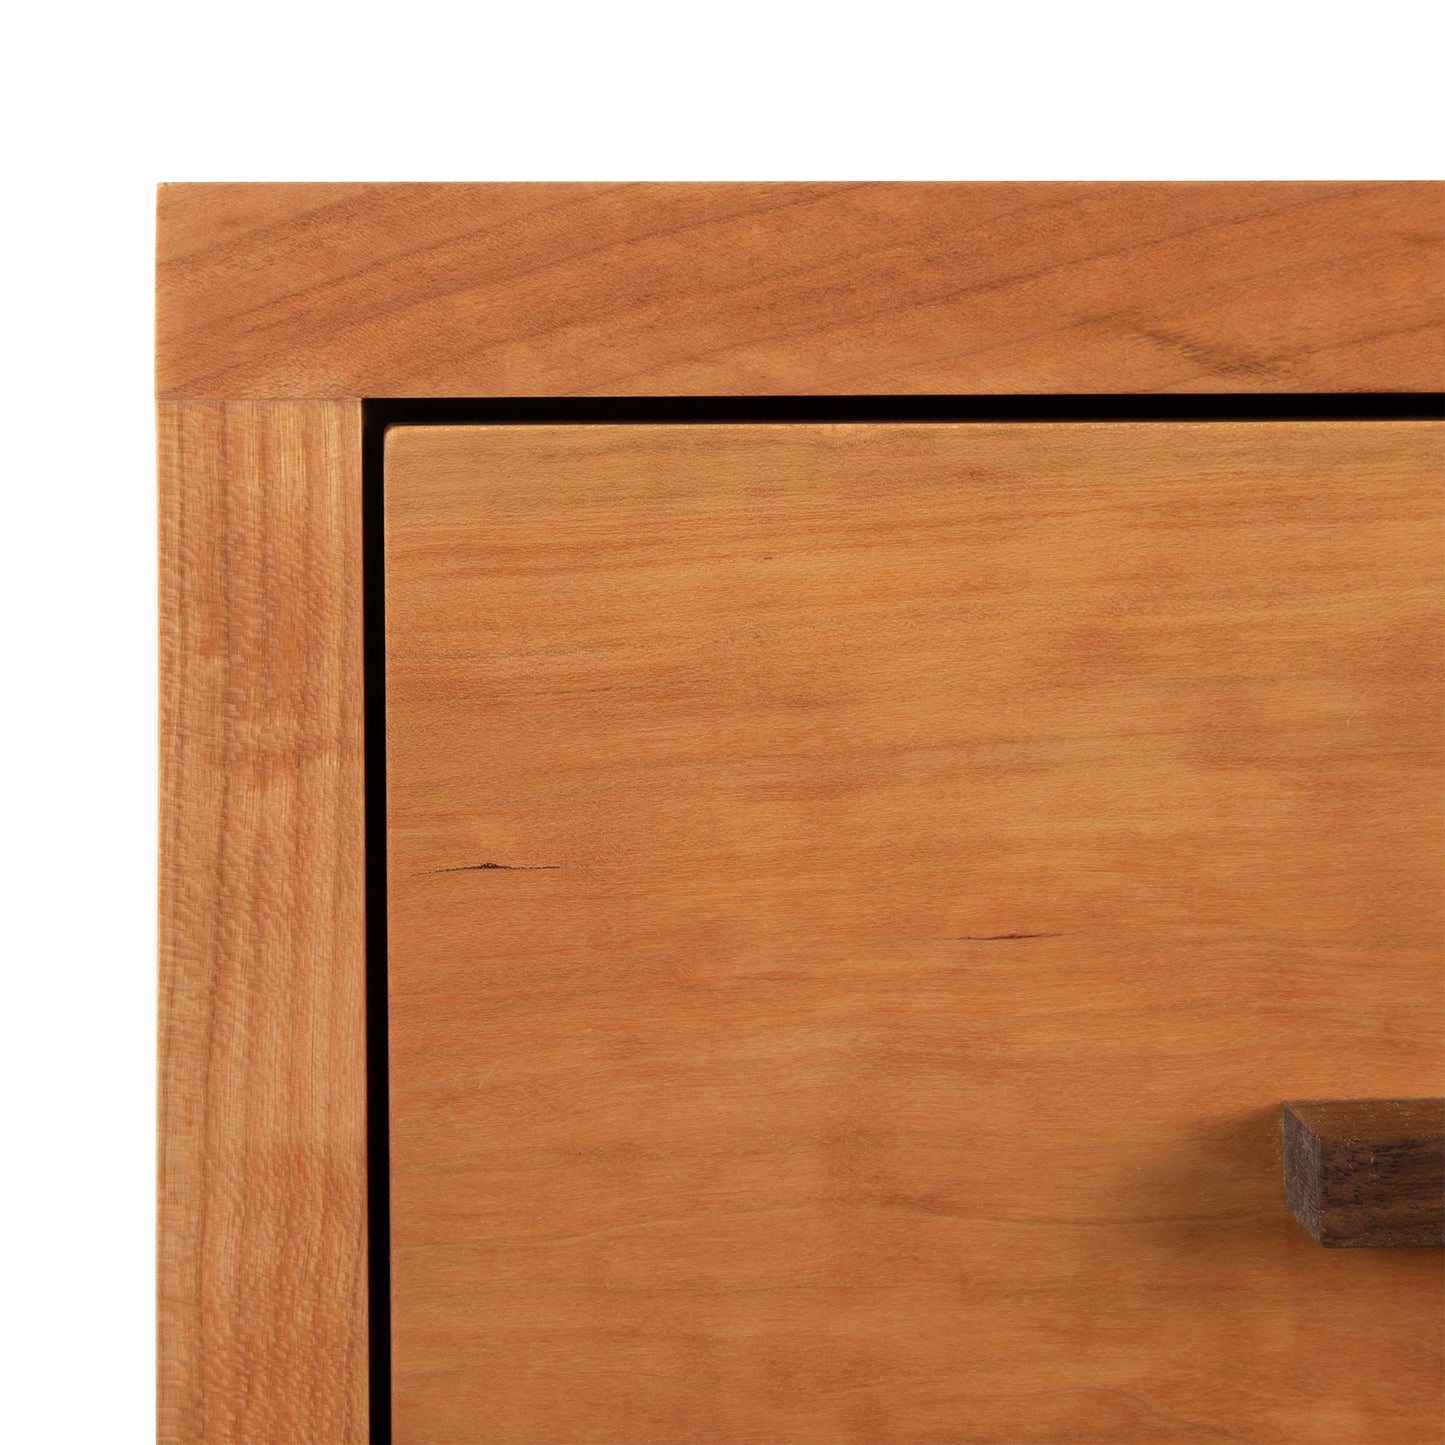 Close-up view of a Vermont Furniture Designs Modern American 1-Drawer Enclosed Shelf Nightstand with a minimalist design, highlighting the grain and texture of the wood and a visible handle on the right side.